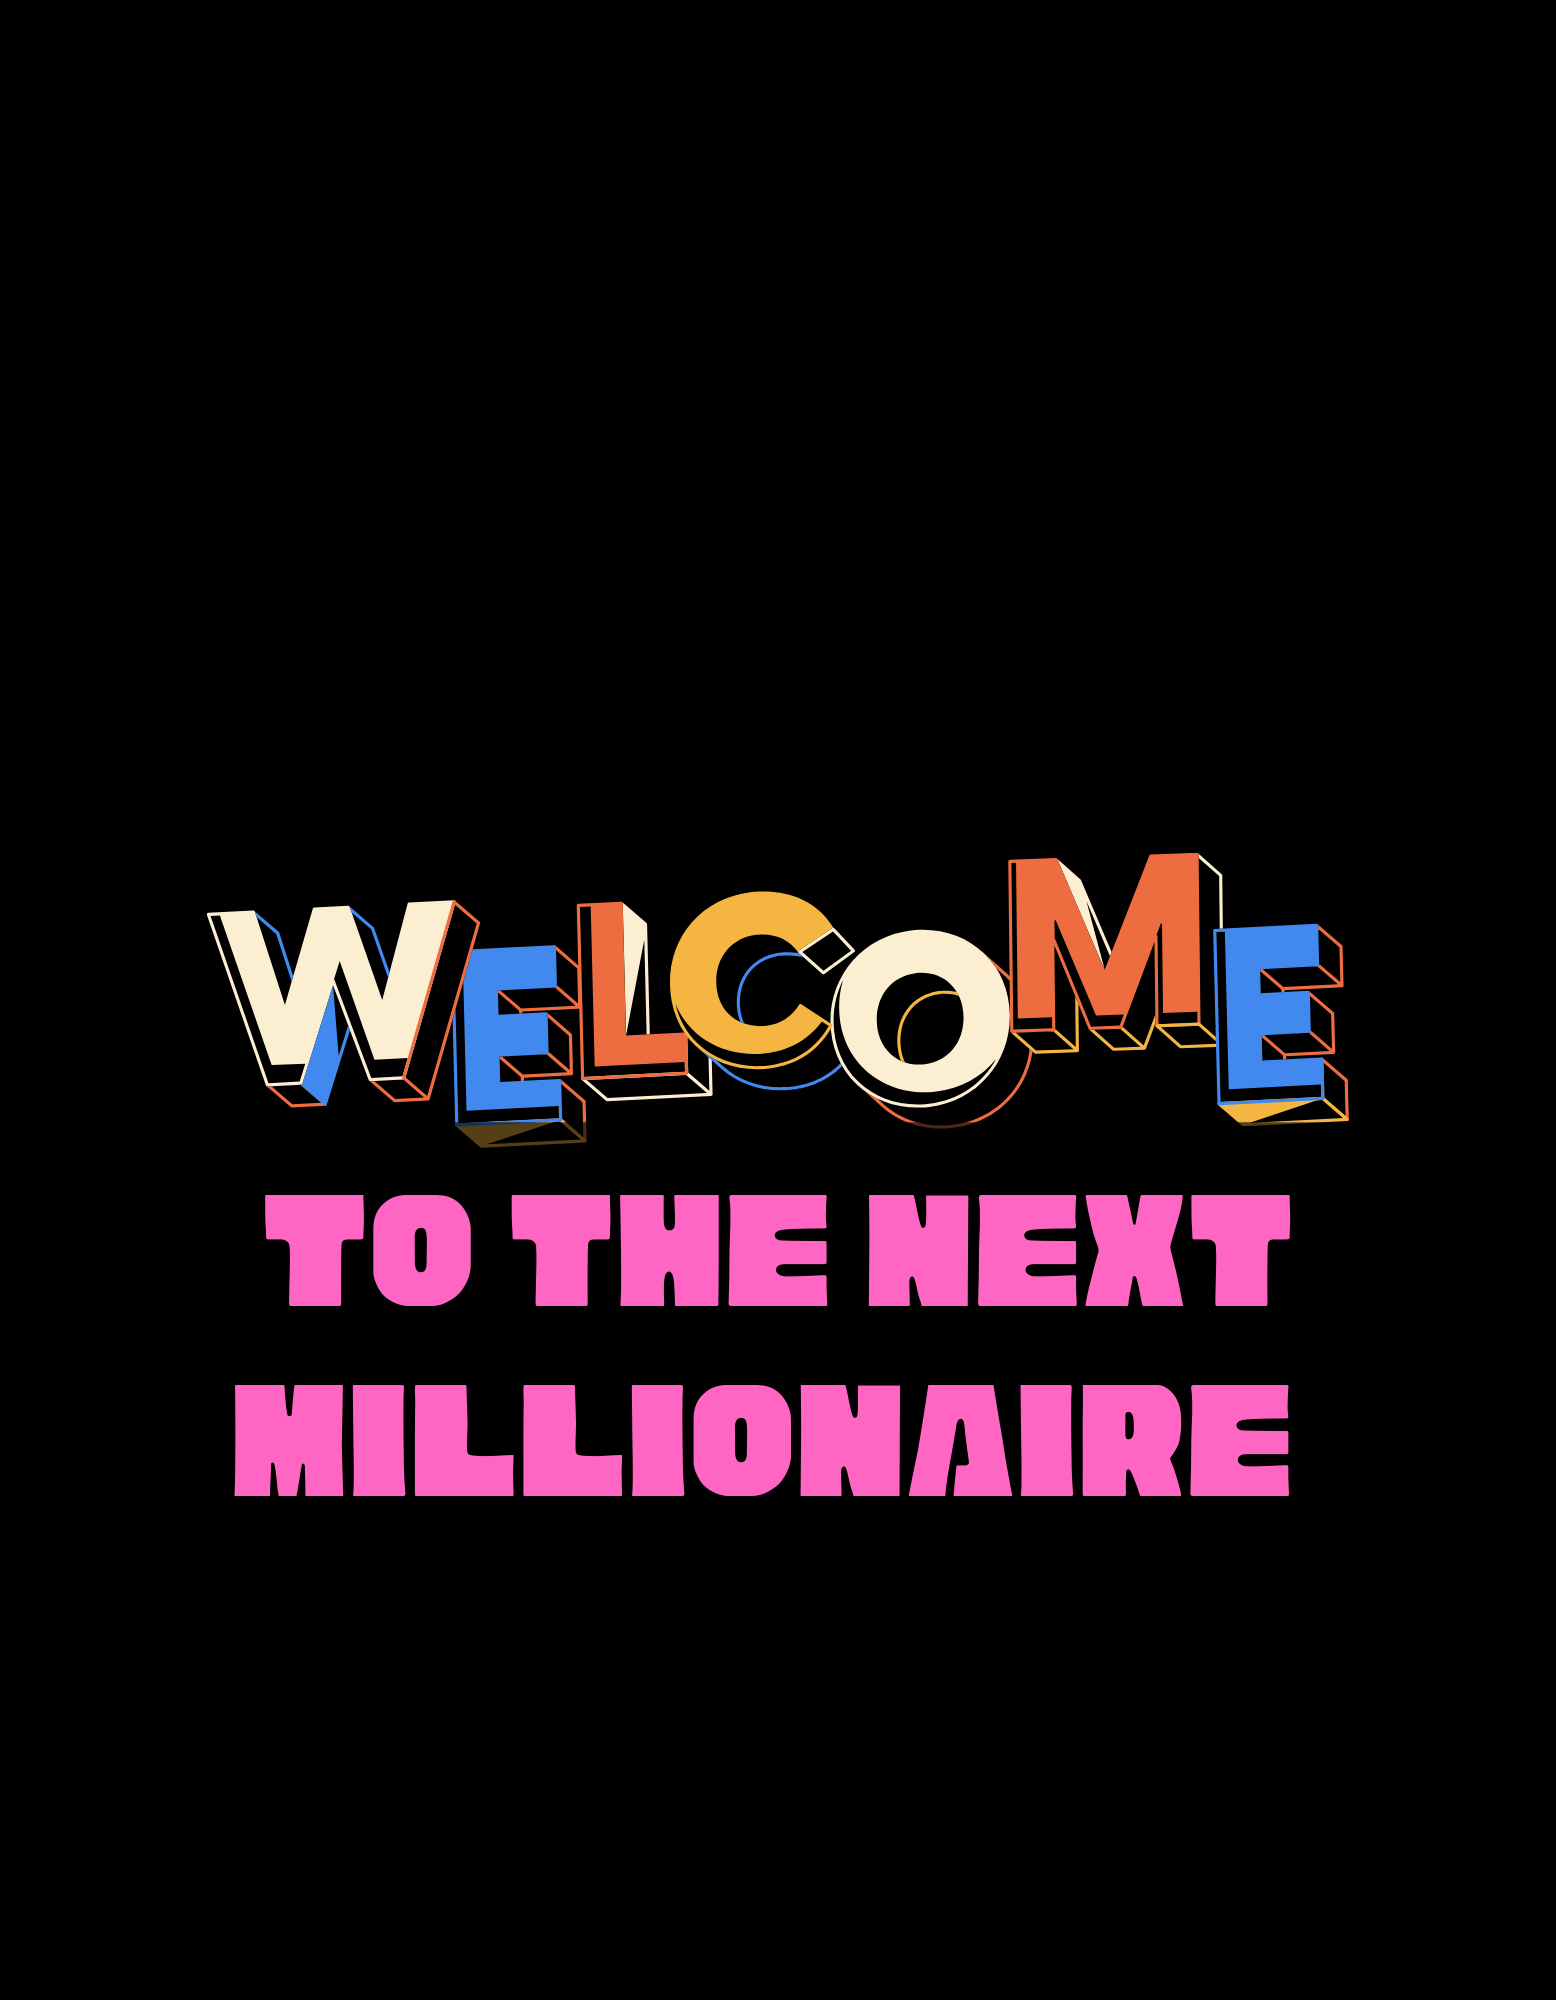 Welcome to the next Millionaire